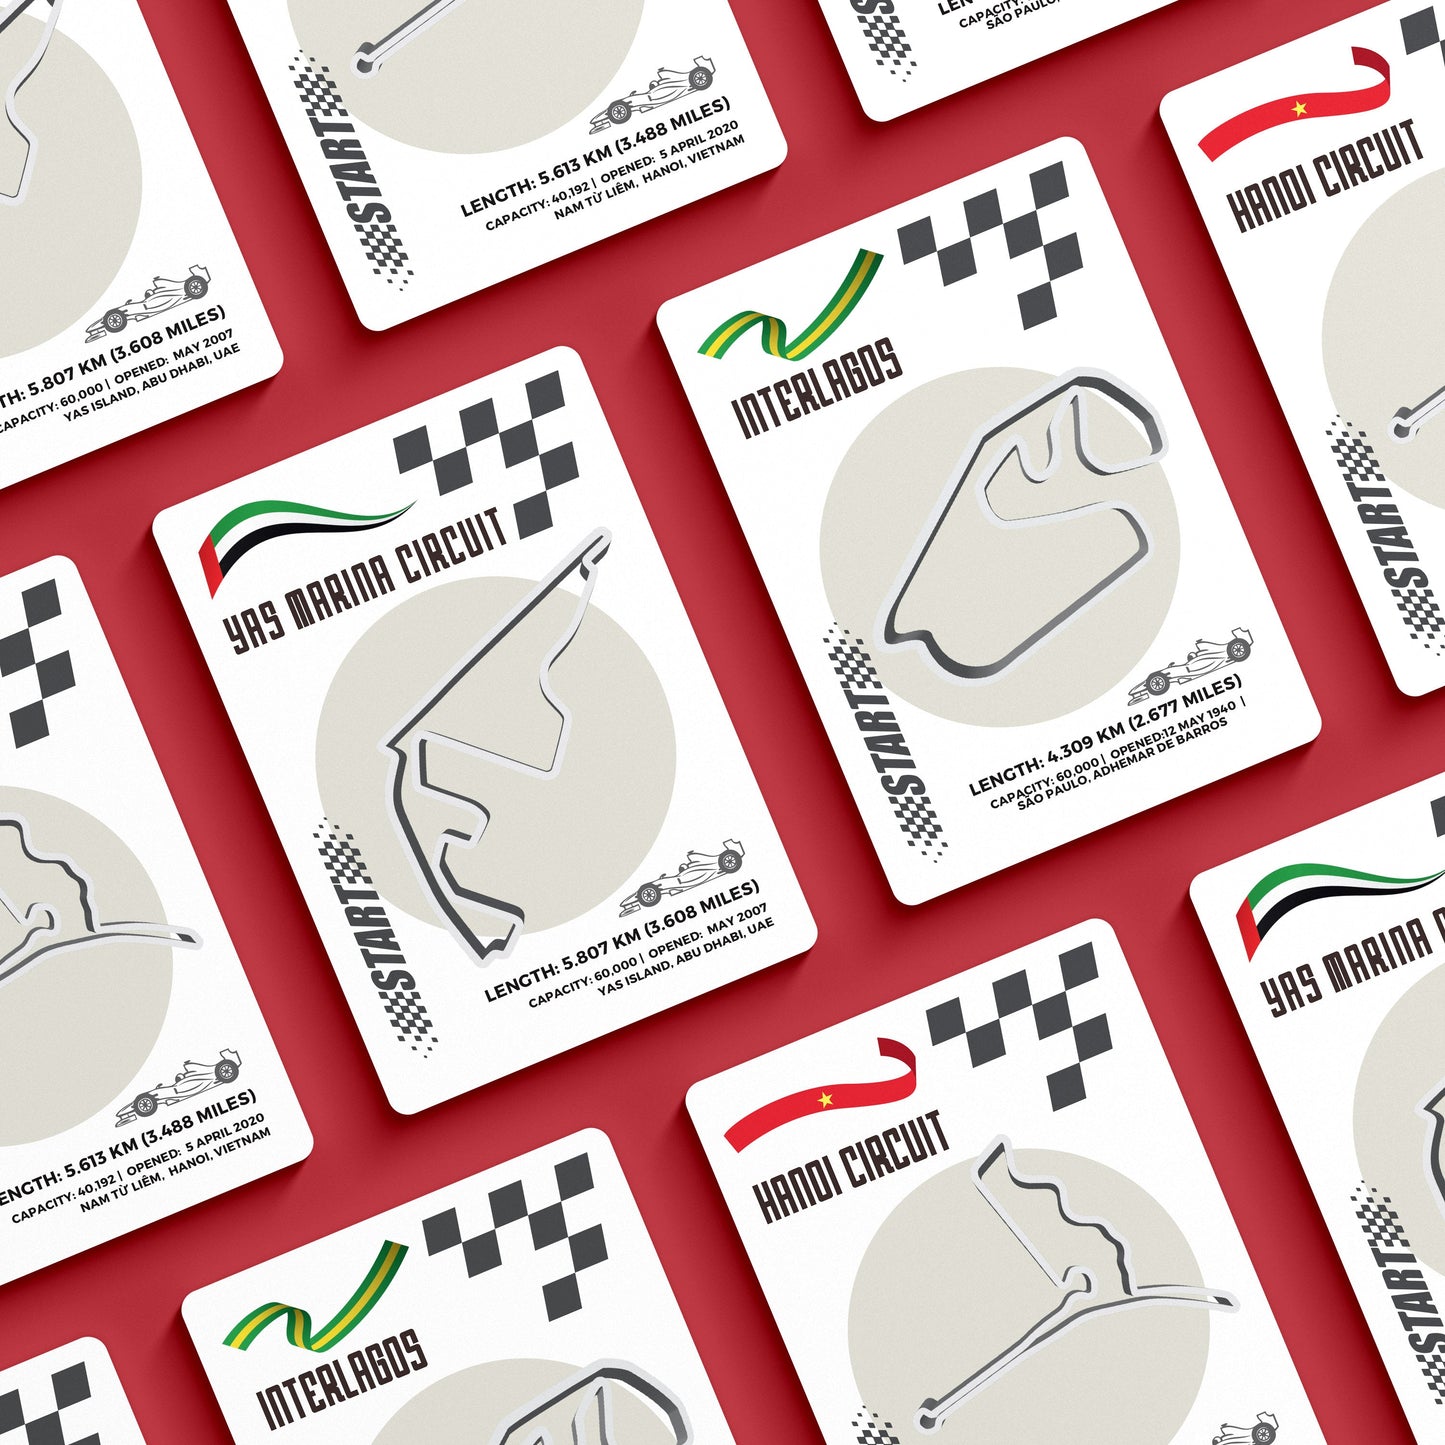 Get the ultimate guide to F1 racing tracks with our Algarve International Circuit posters. Featuring detailed information on the circuit's history, construction, country, and notable moments, on matte premium paper that is age-resistant. The perfect addition to any Formula One fan's collection.